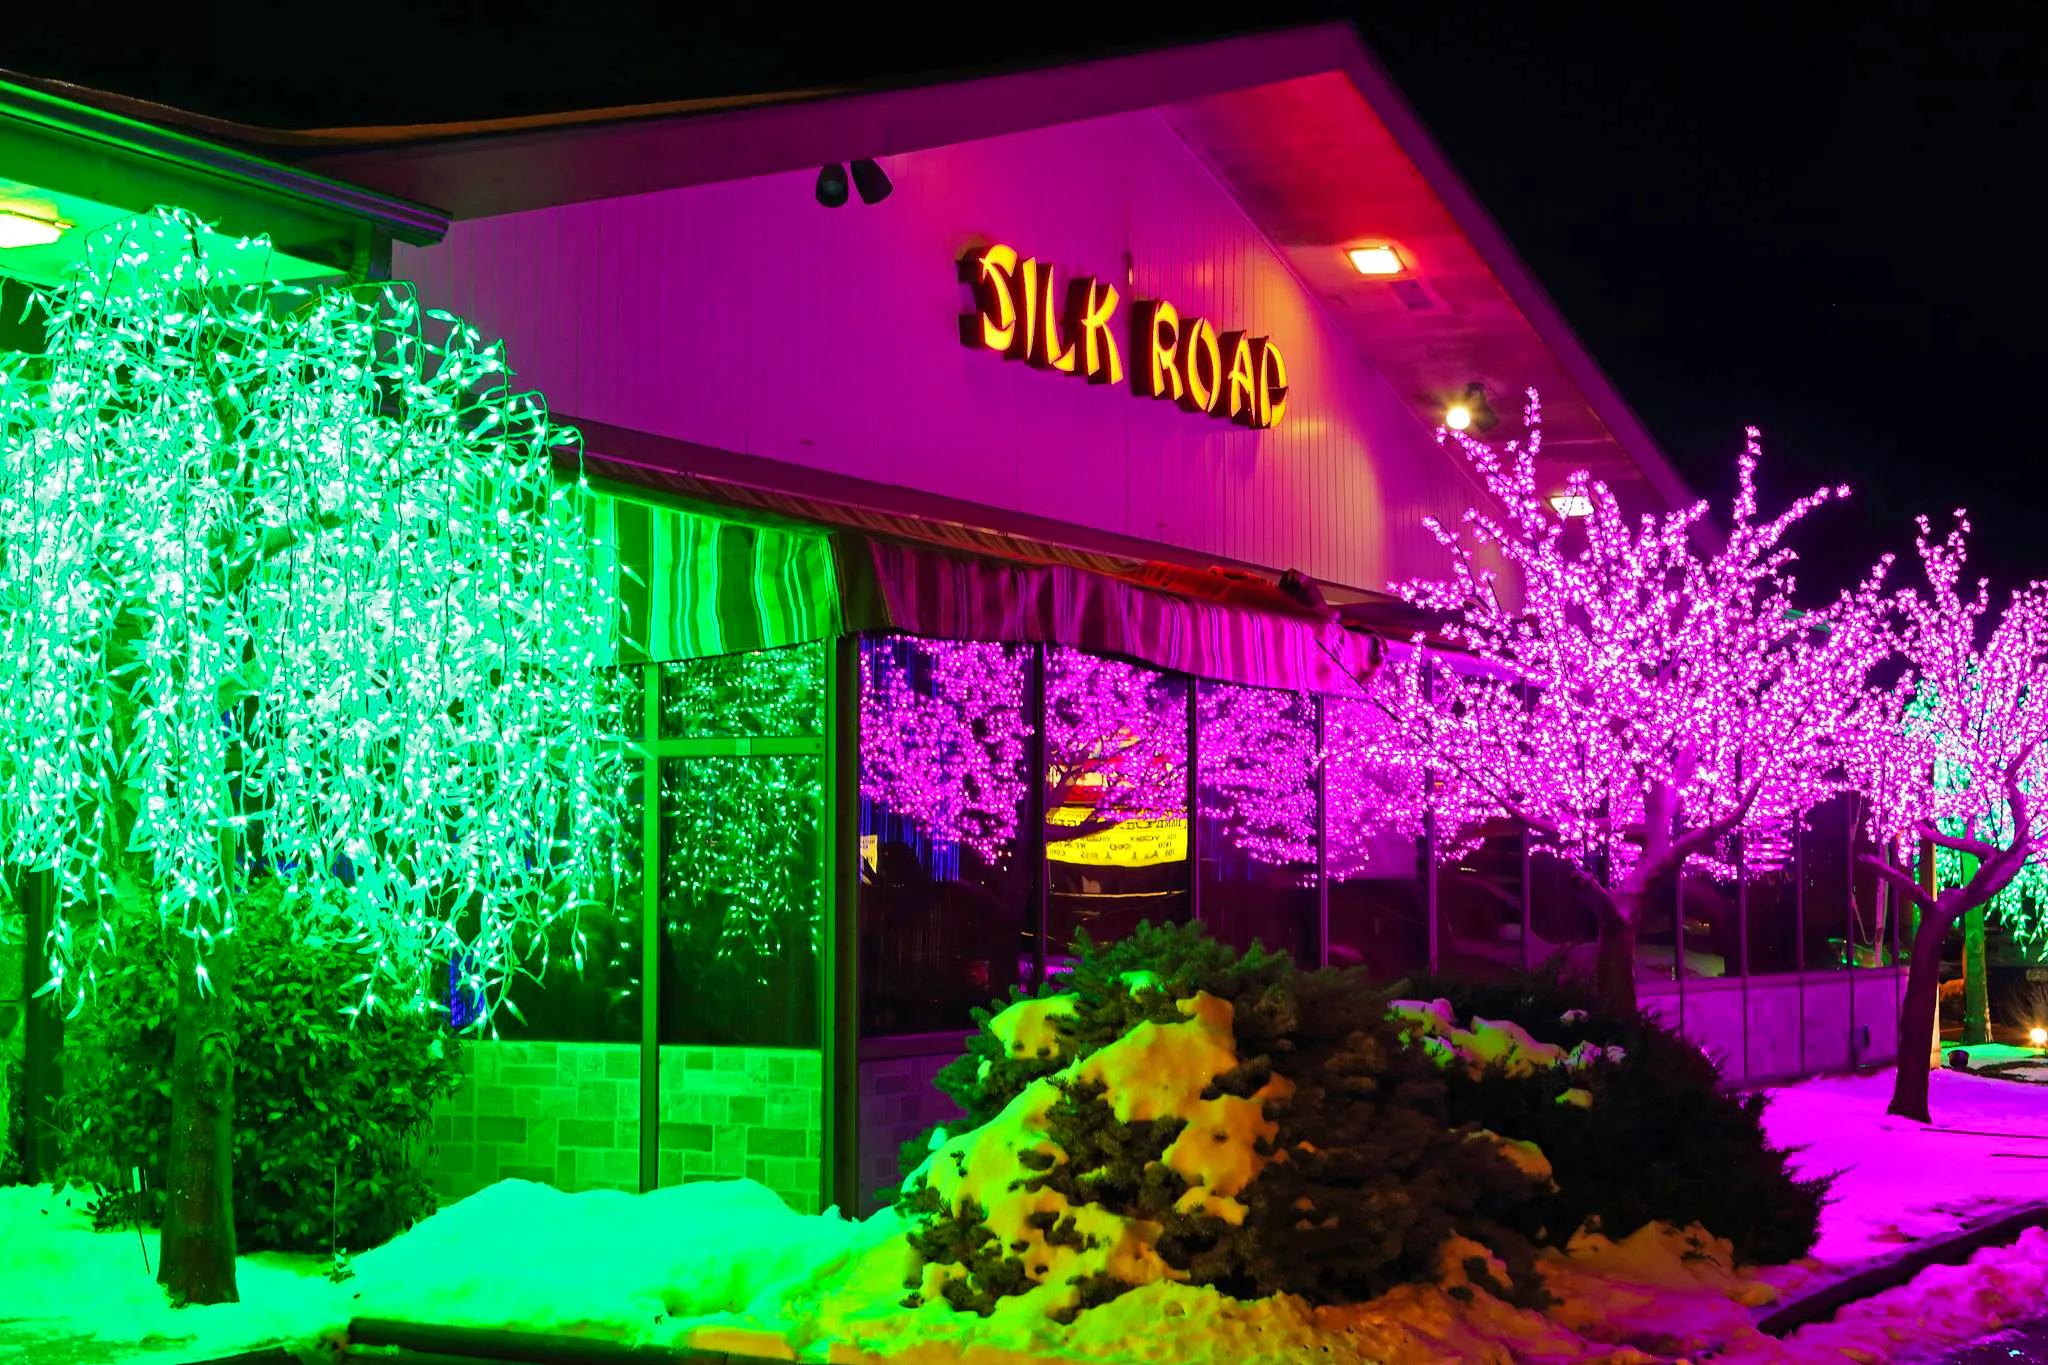 The outside of Silk Road restaurant with neon lights and trees.